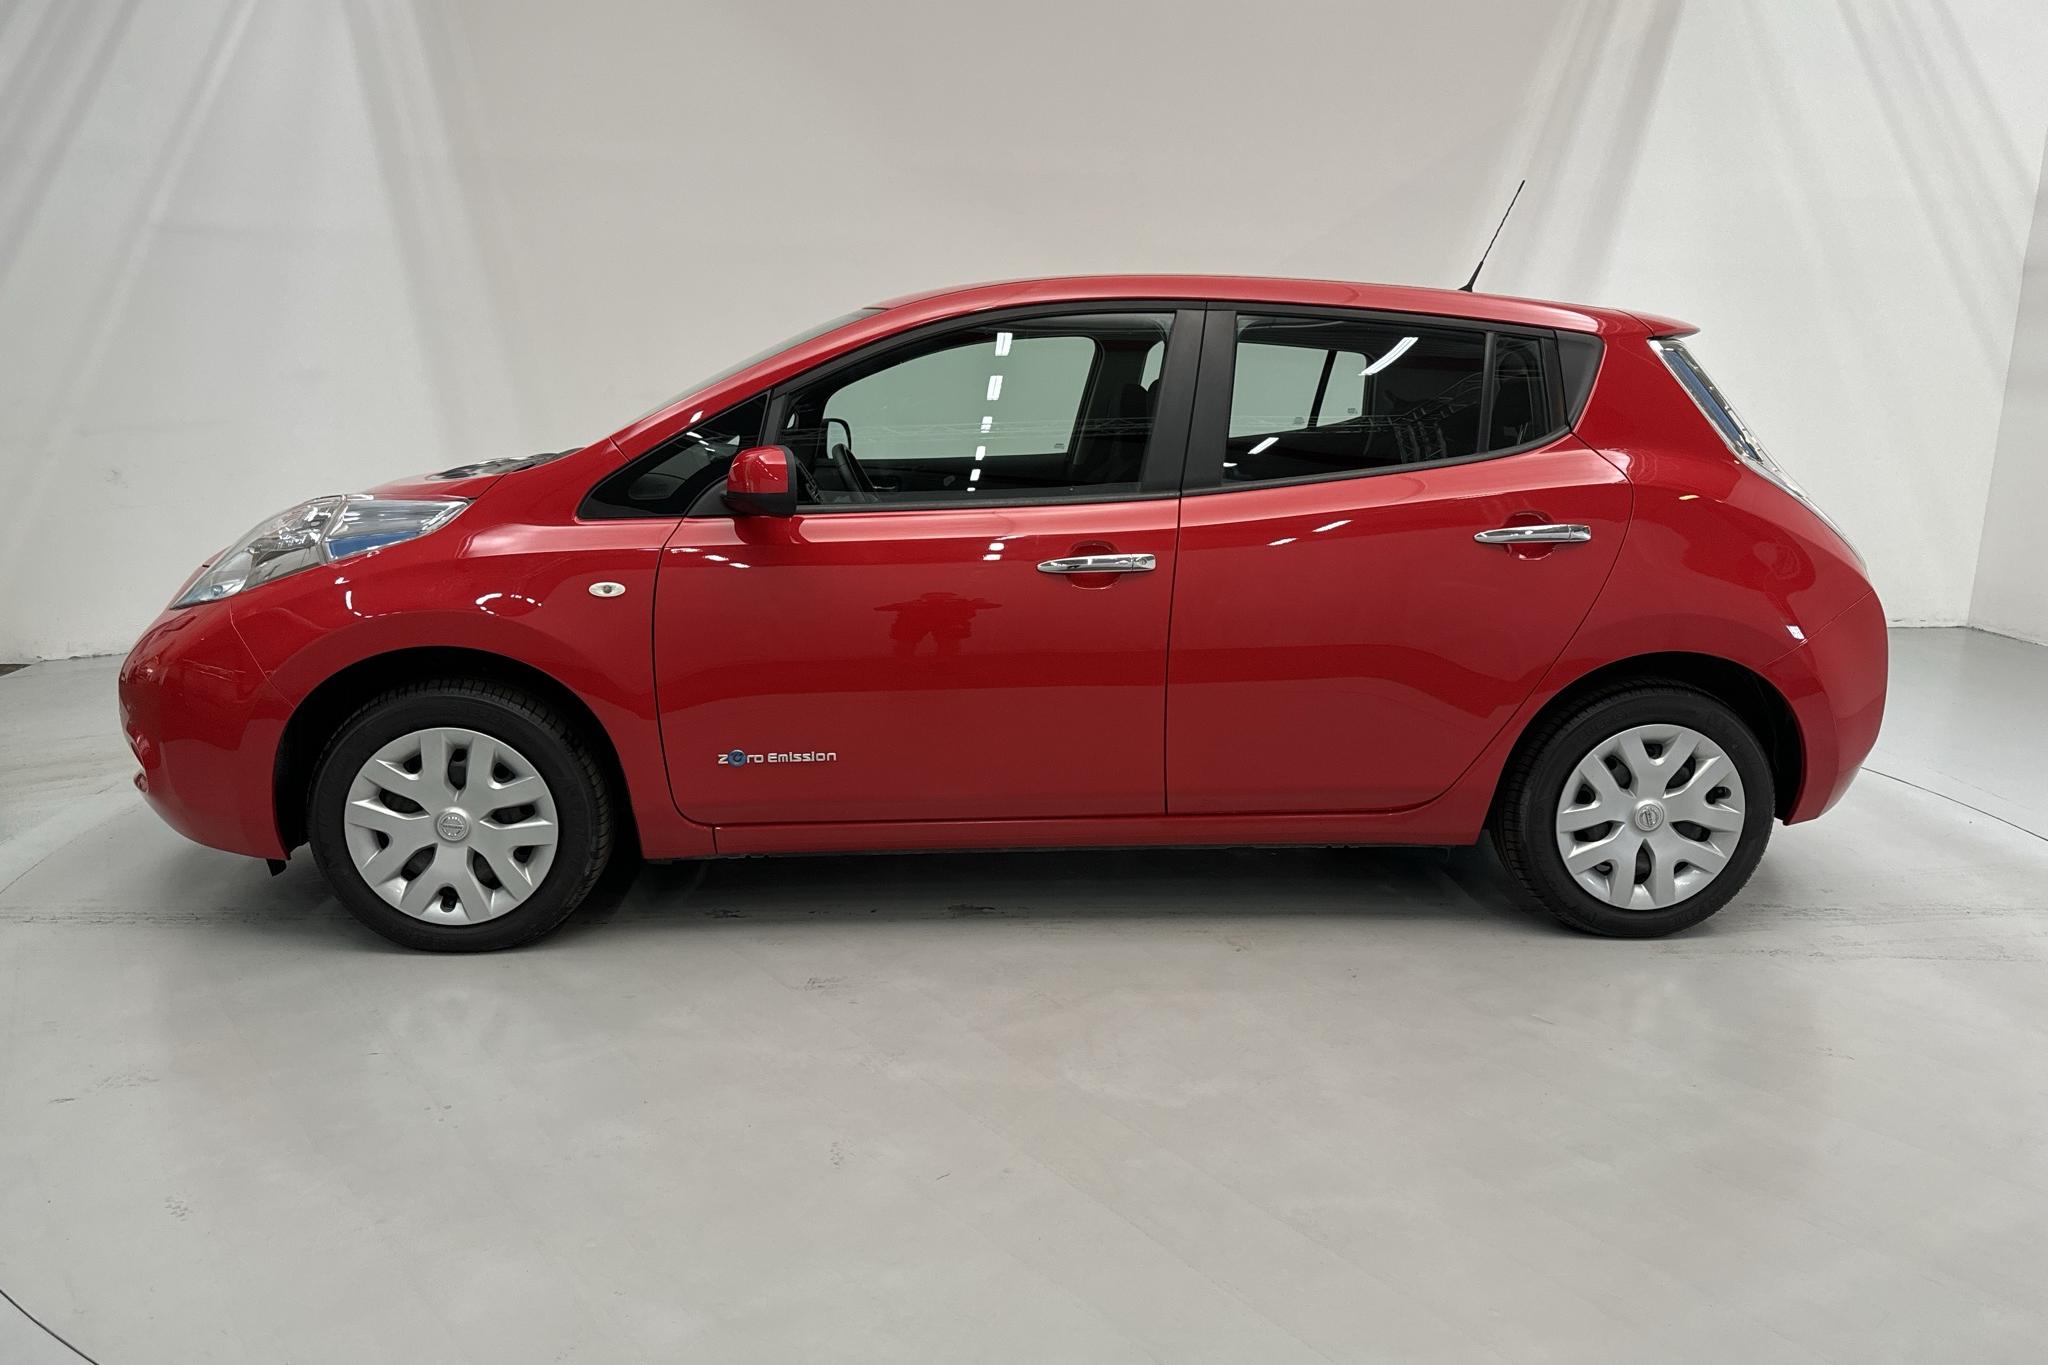 Nissan LEAF 5dr (109hk) - 13 560 km - Automatic - red - 2017